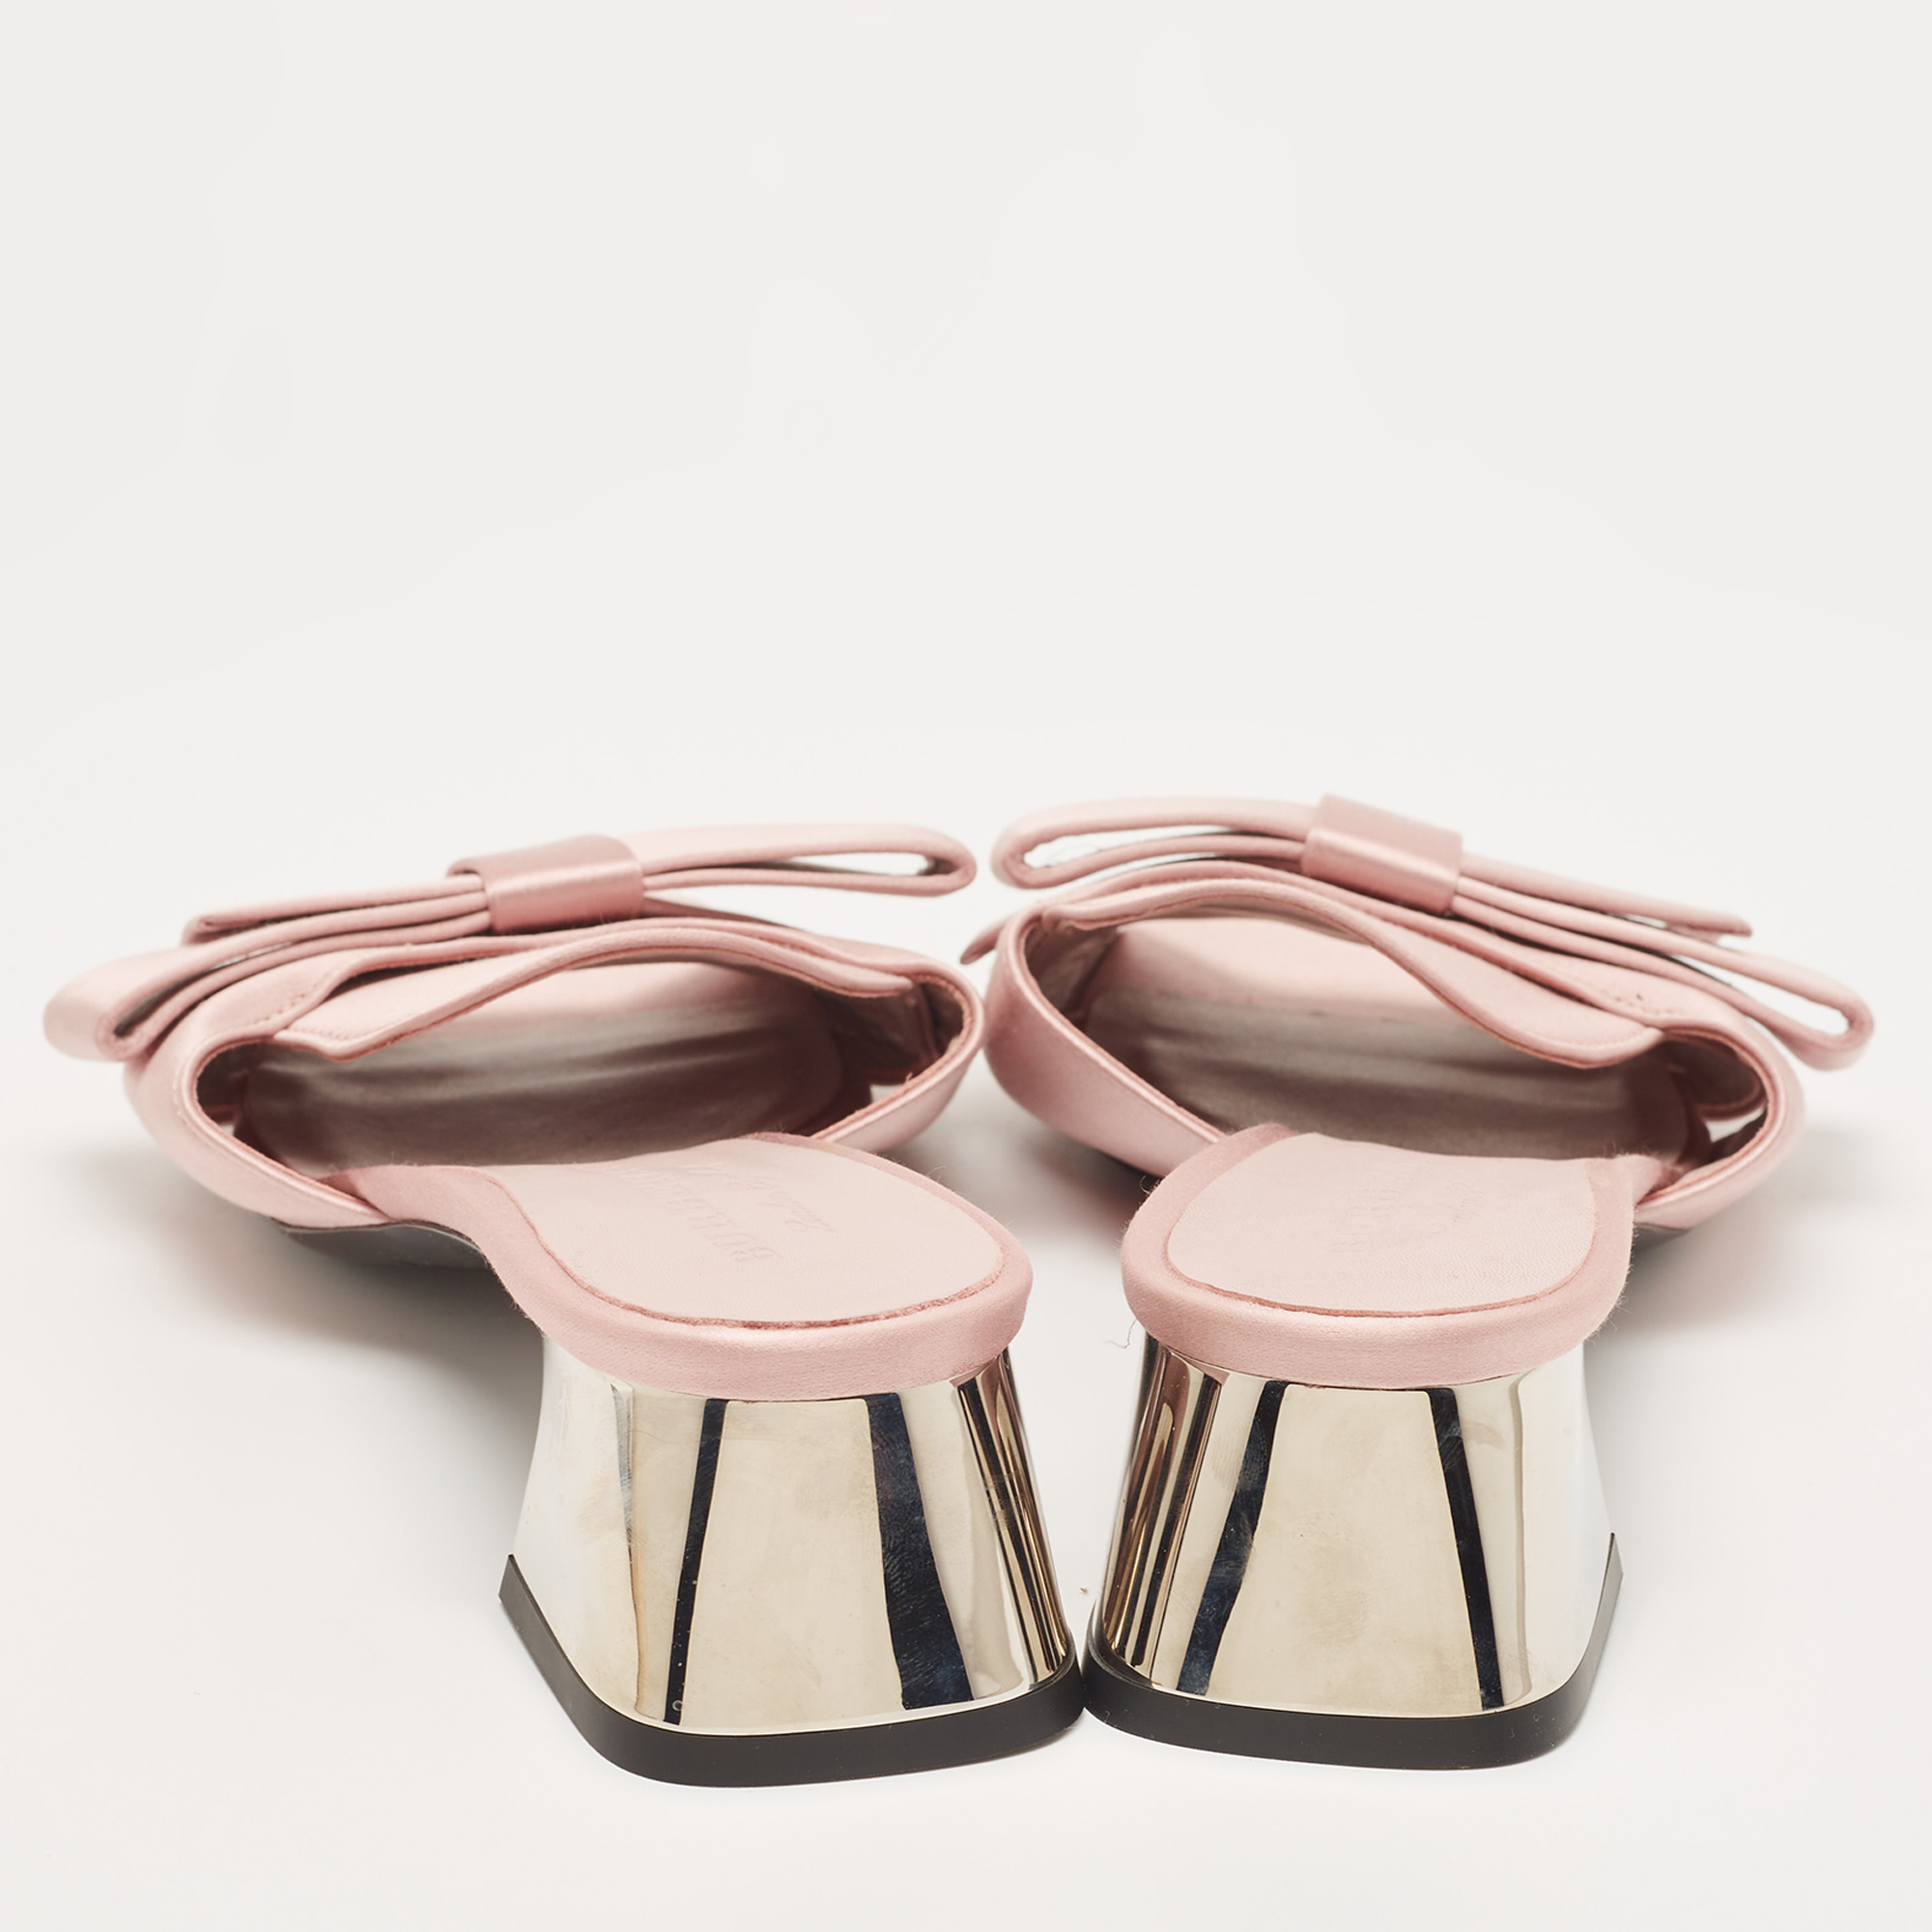 Burberry Pink Satin Bow Mules  Size 41